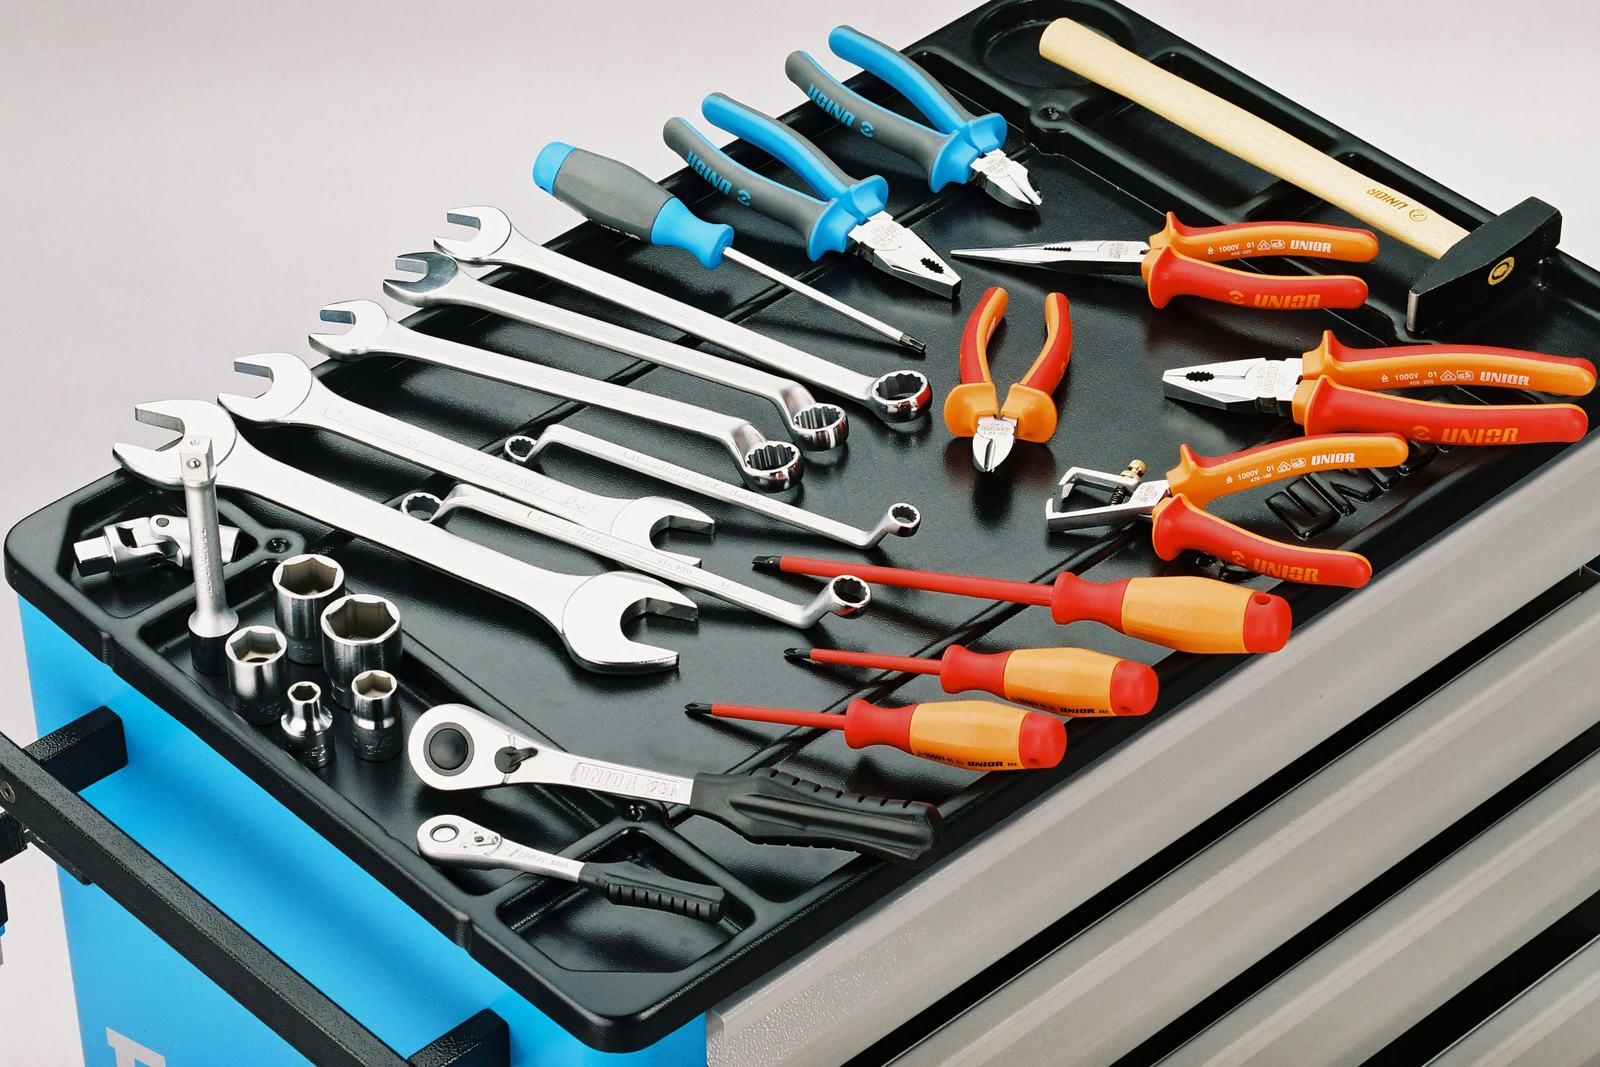 Unior’s Tools range includes more than 200 specific bicycle tools.